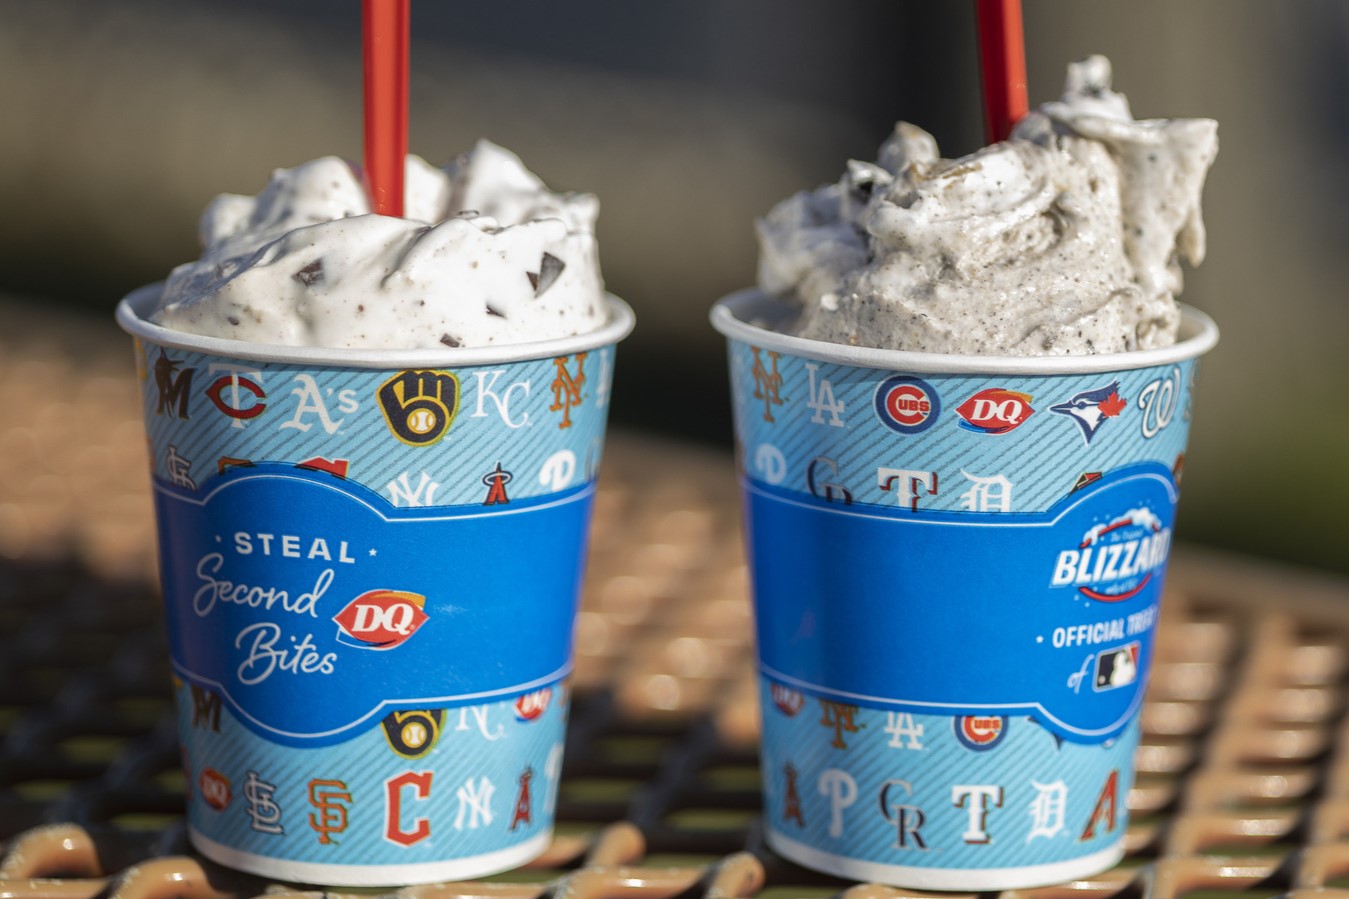 Introducing The Irresistible Puppy Chow Blizzard!